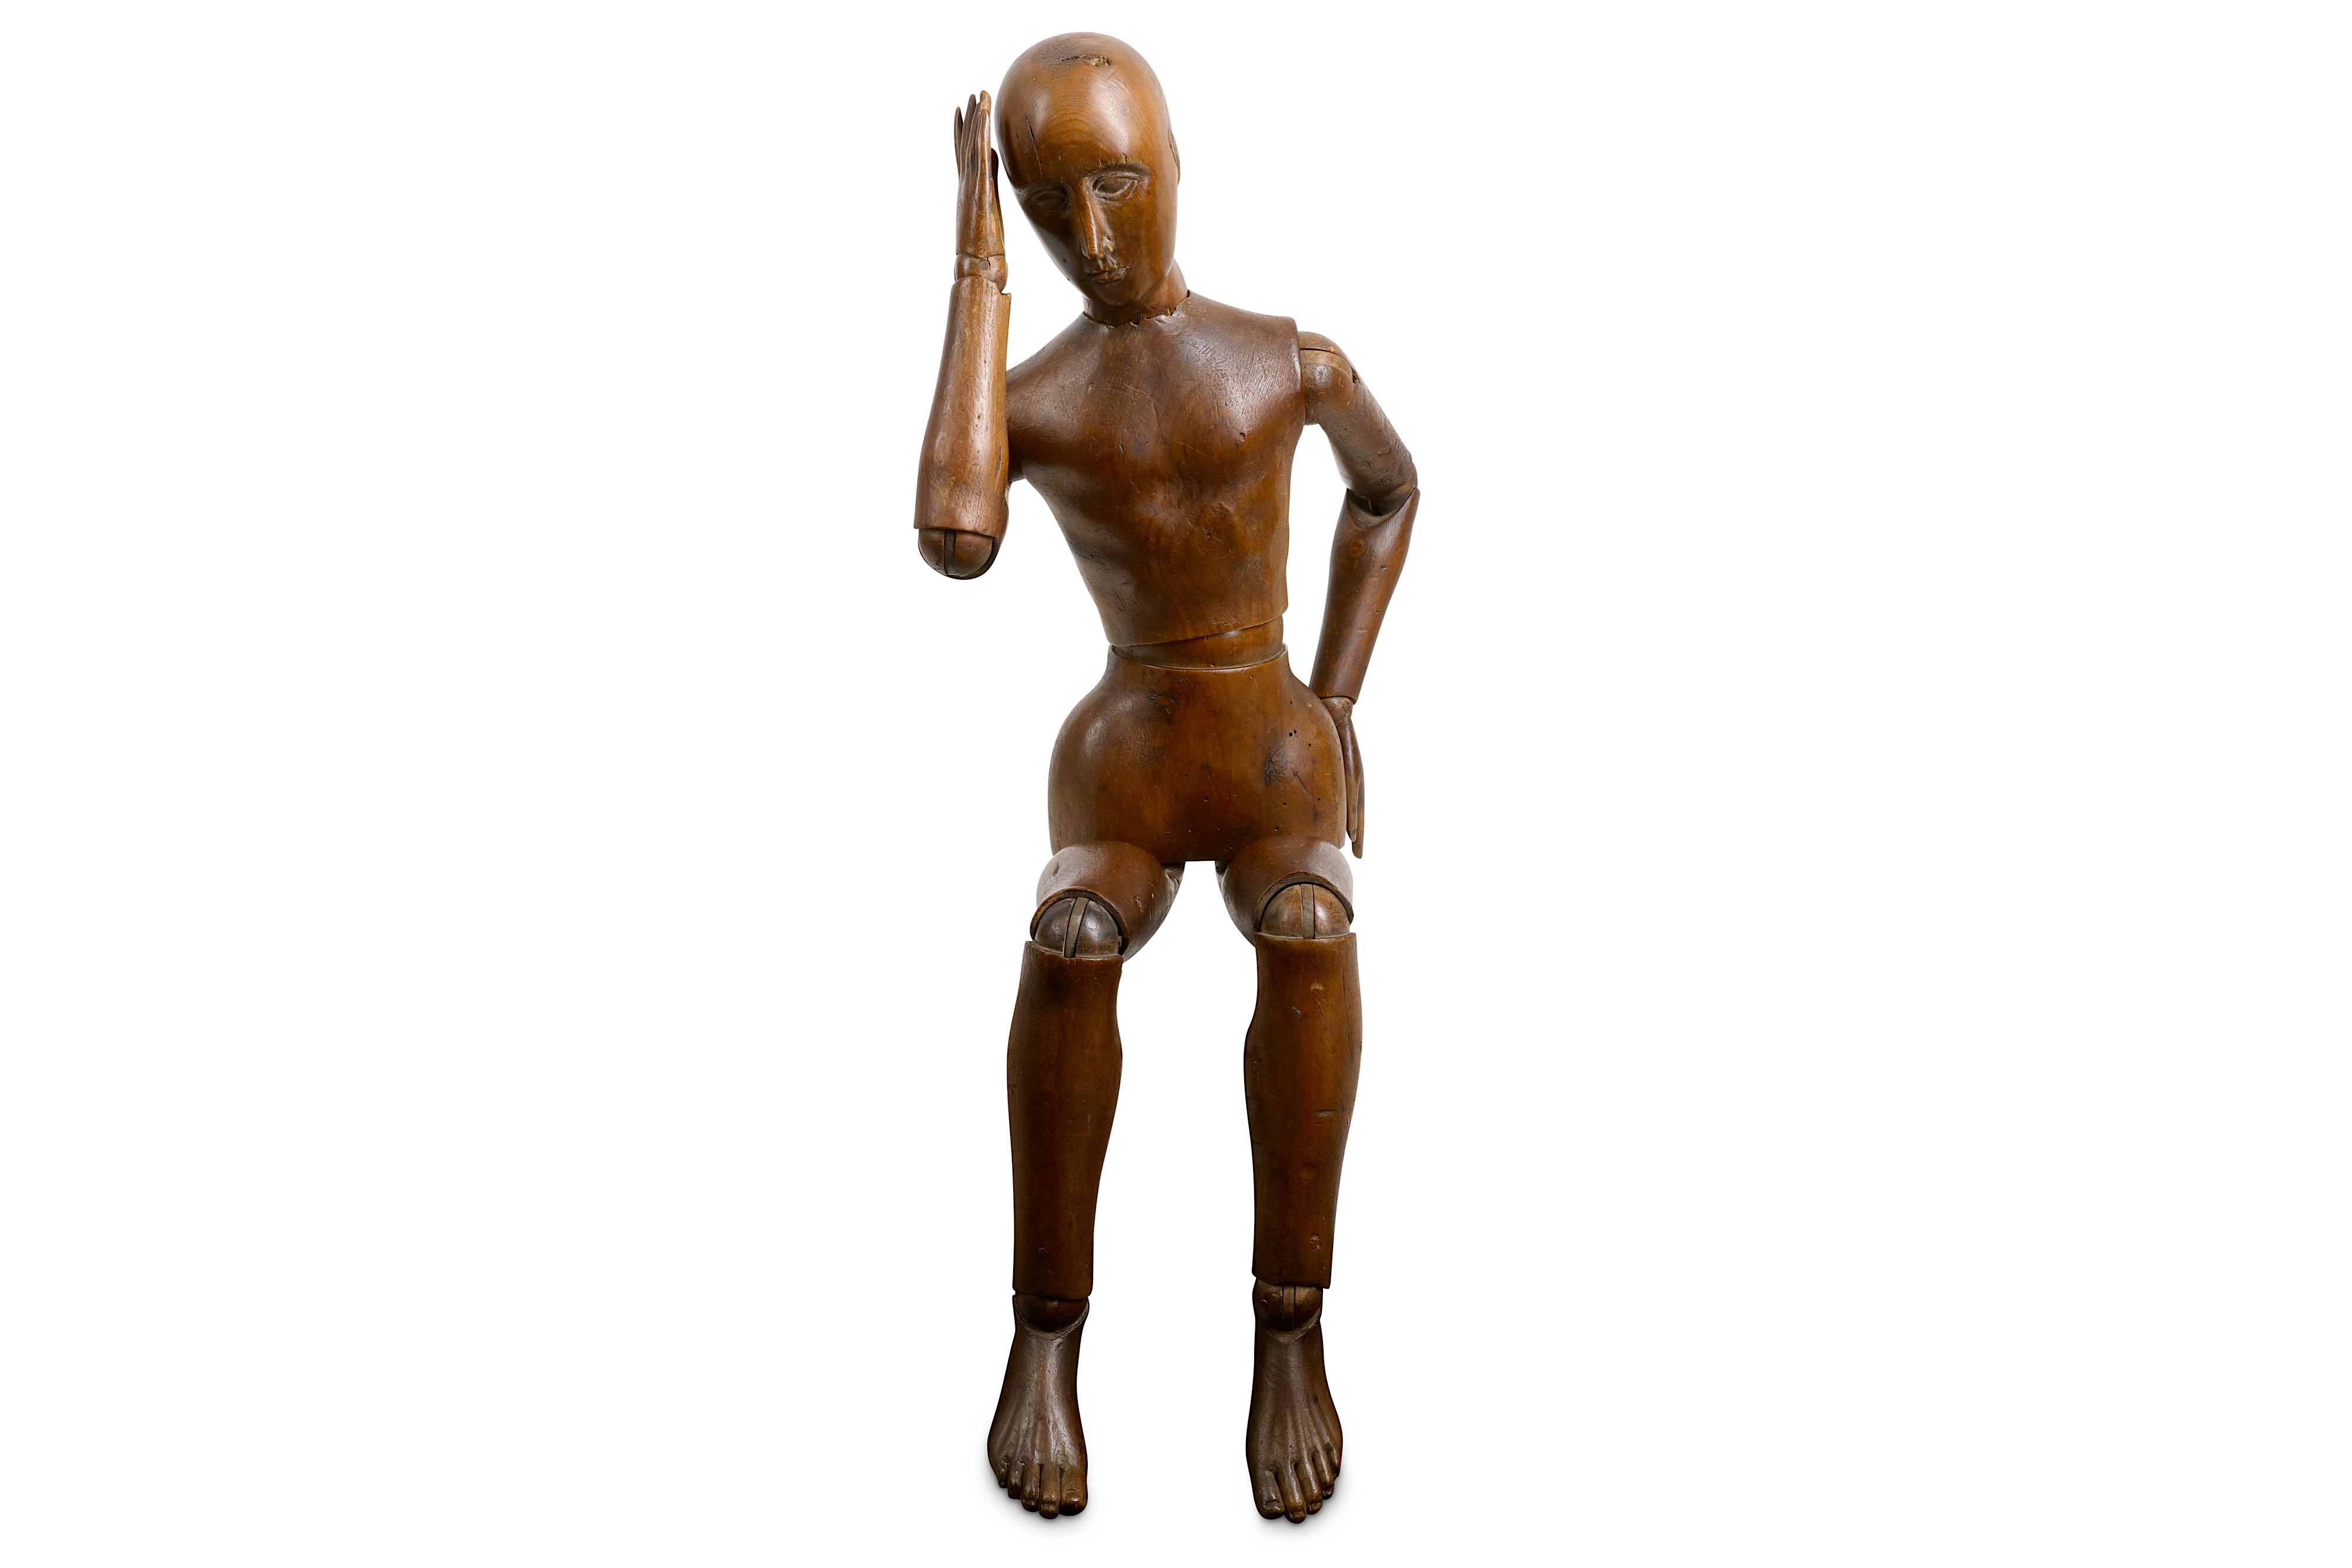 AN EARLY 20TH CENTURY CARVED AND STAINED WOOD LAY FIGURE OR ARTIST'S MANNEQUIN - Image 4 of 4